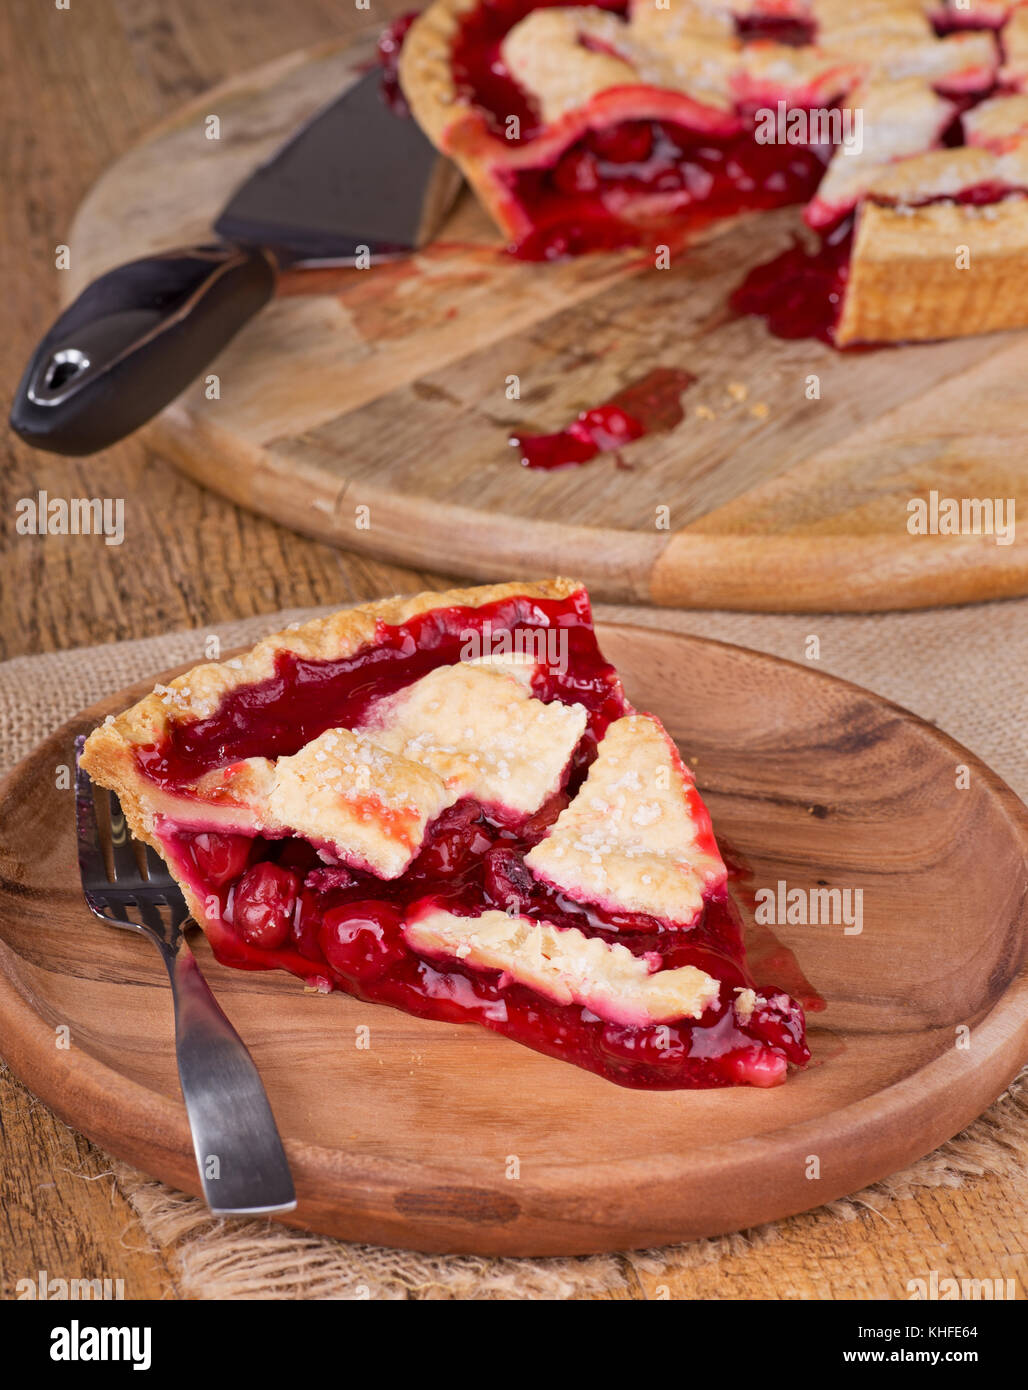 Slice of cherry pie on a wooden plate Stock Photo